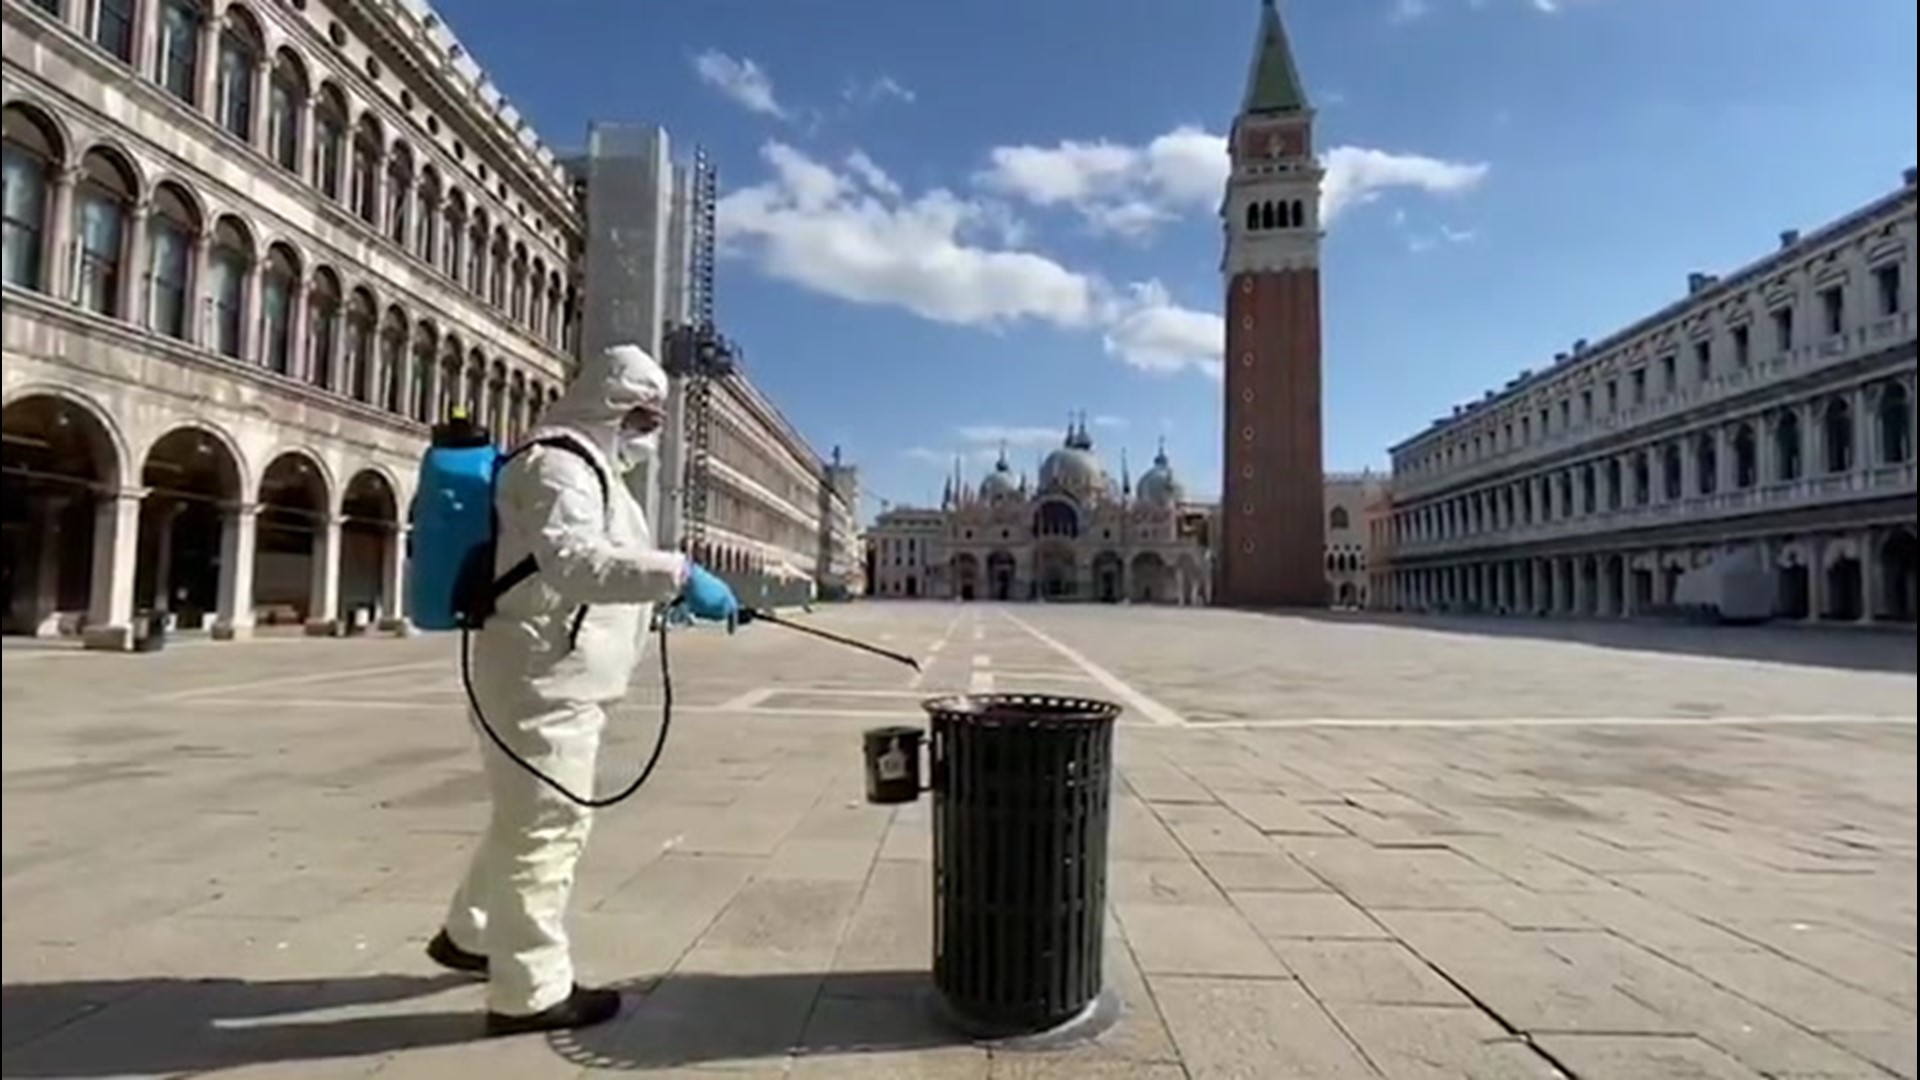 After the the third week of lockdown in Italy, efforts are being made to disinfect public areas in Venice, Italy, on March 27.